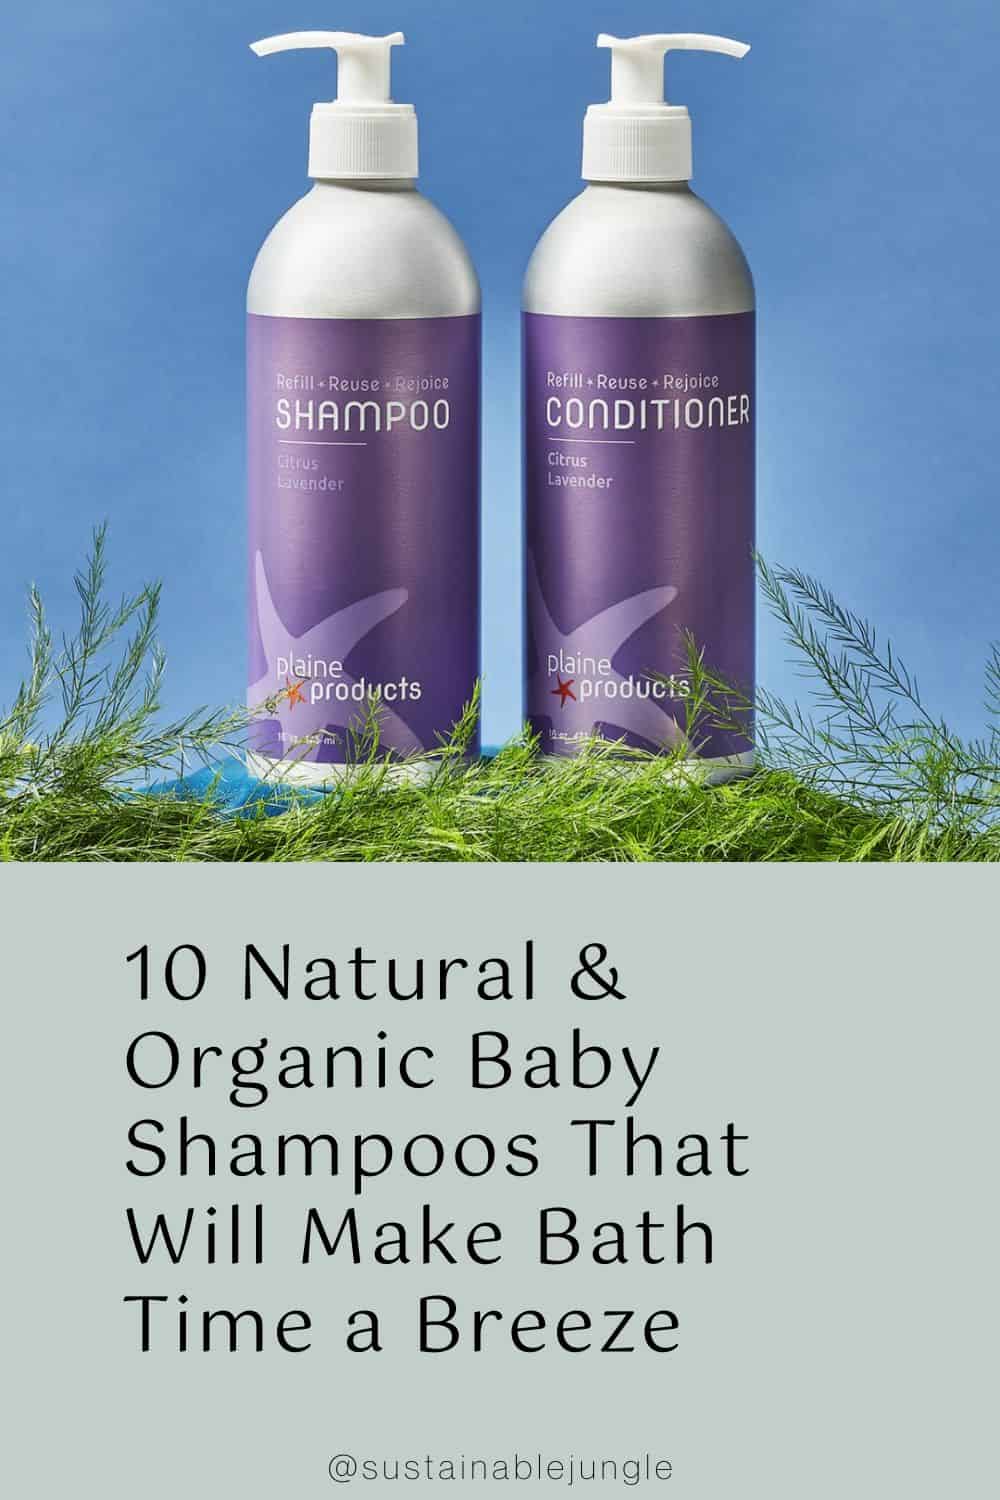 10 Natural & Organic Baby Shampoos That Will Make Bath Time a Breeze Image by Plaine Products #organicbabyshampoo #organicbabyshampooandwash #bestorganicbabyshampoo #naturalbabyshampoo #allnaturalbabyshampoo #naturalbabyshampooandconditioner #sustainablejungle